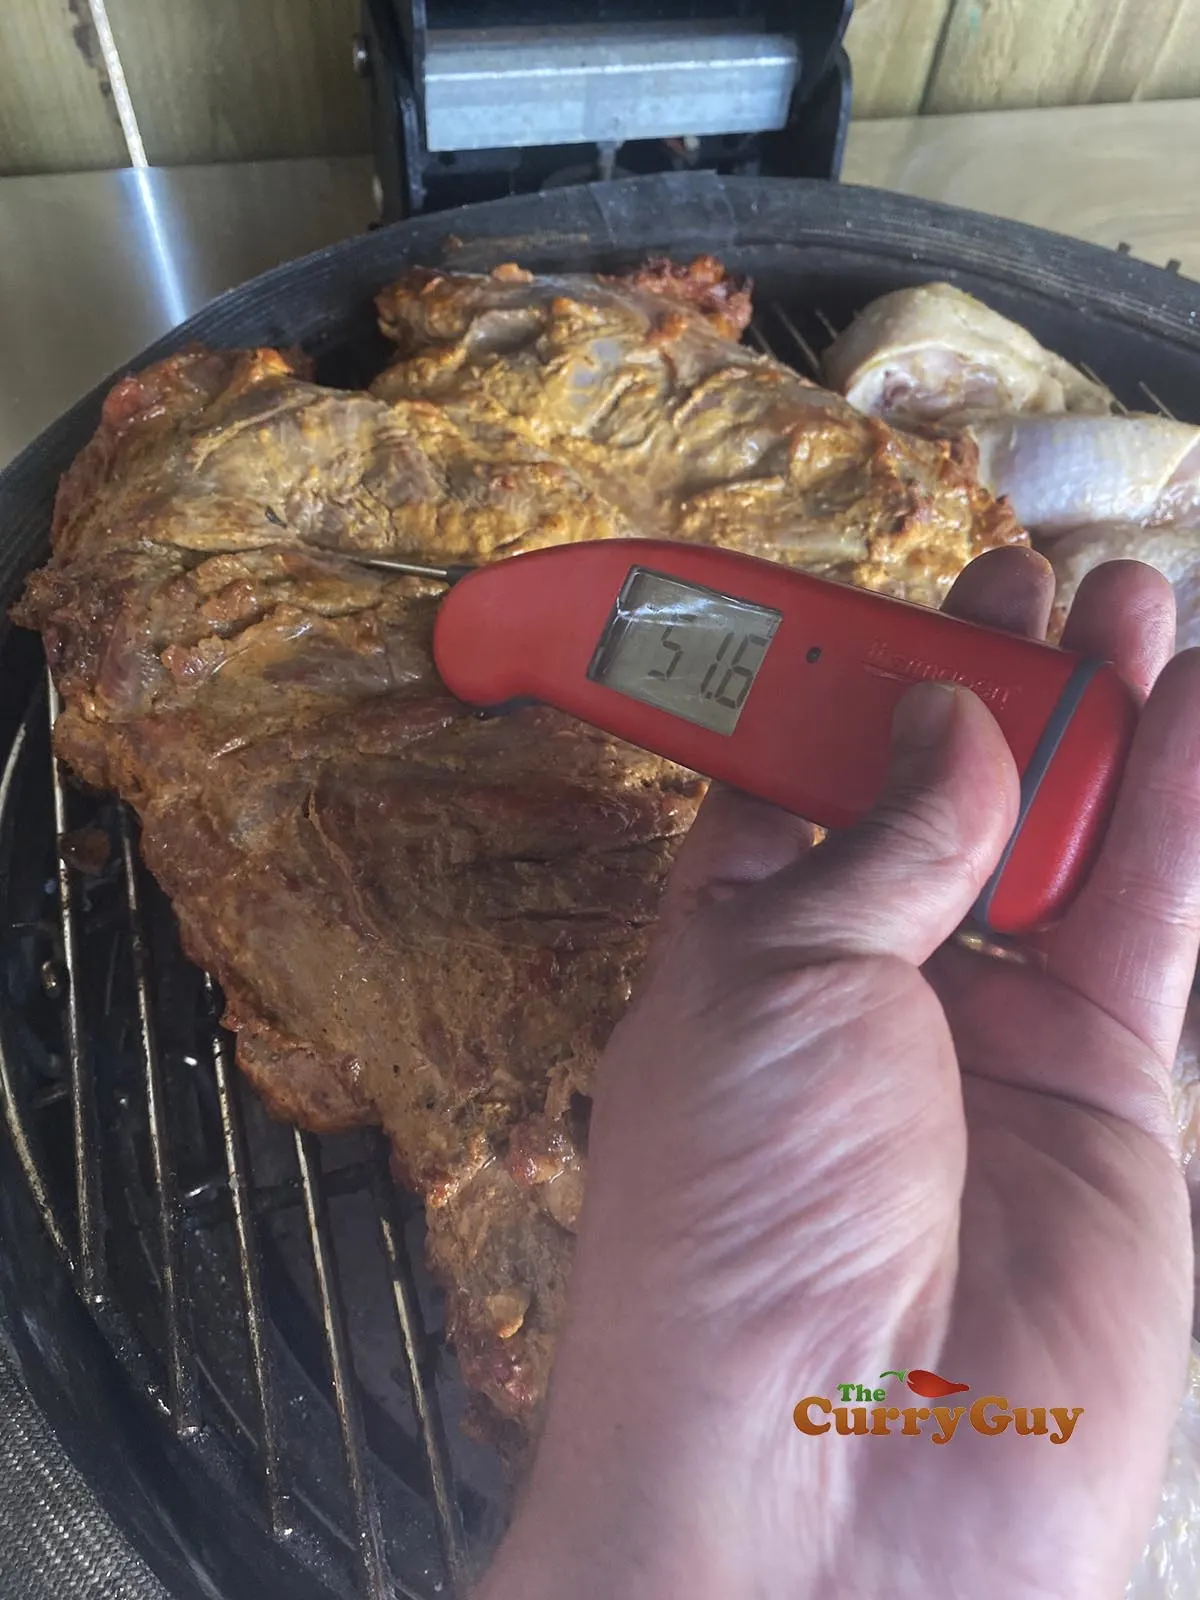 Check temperature of meat